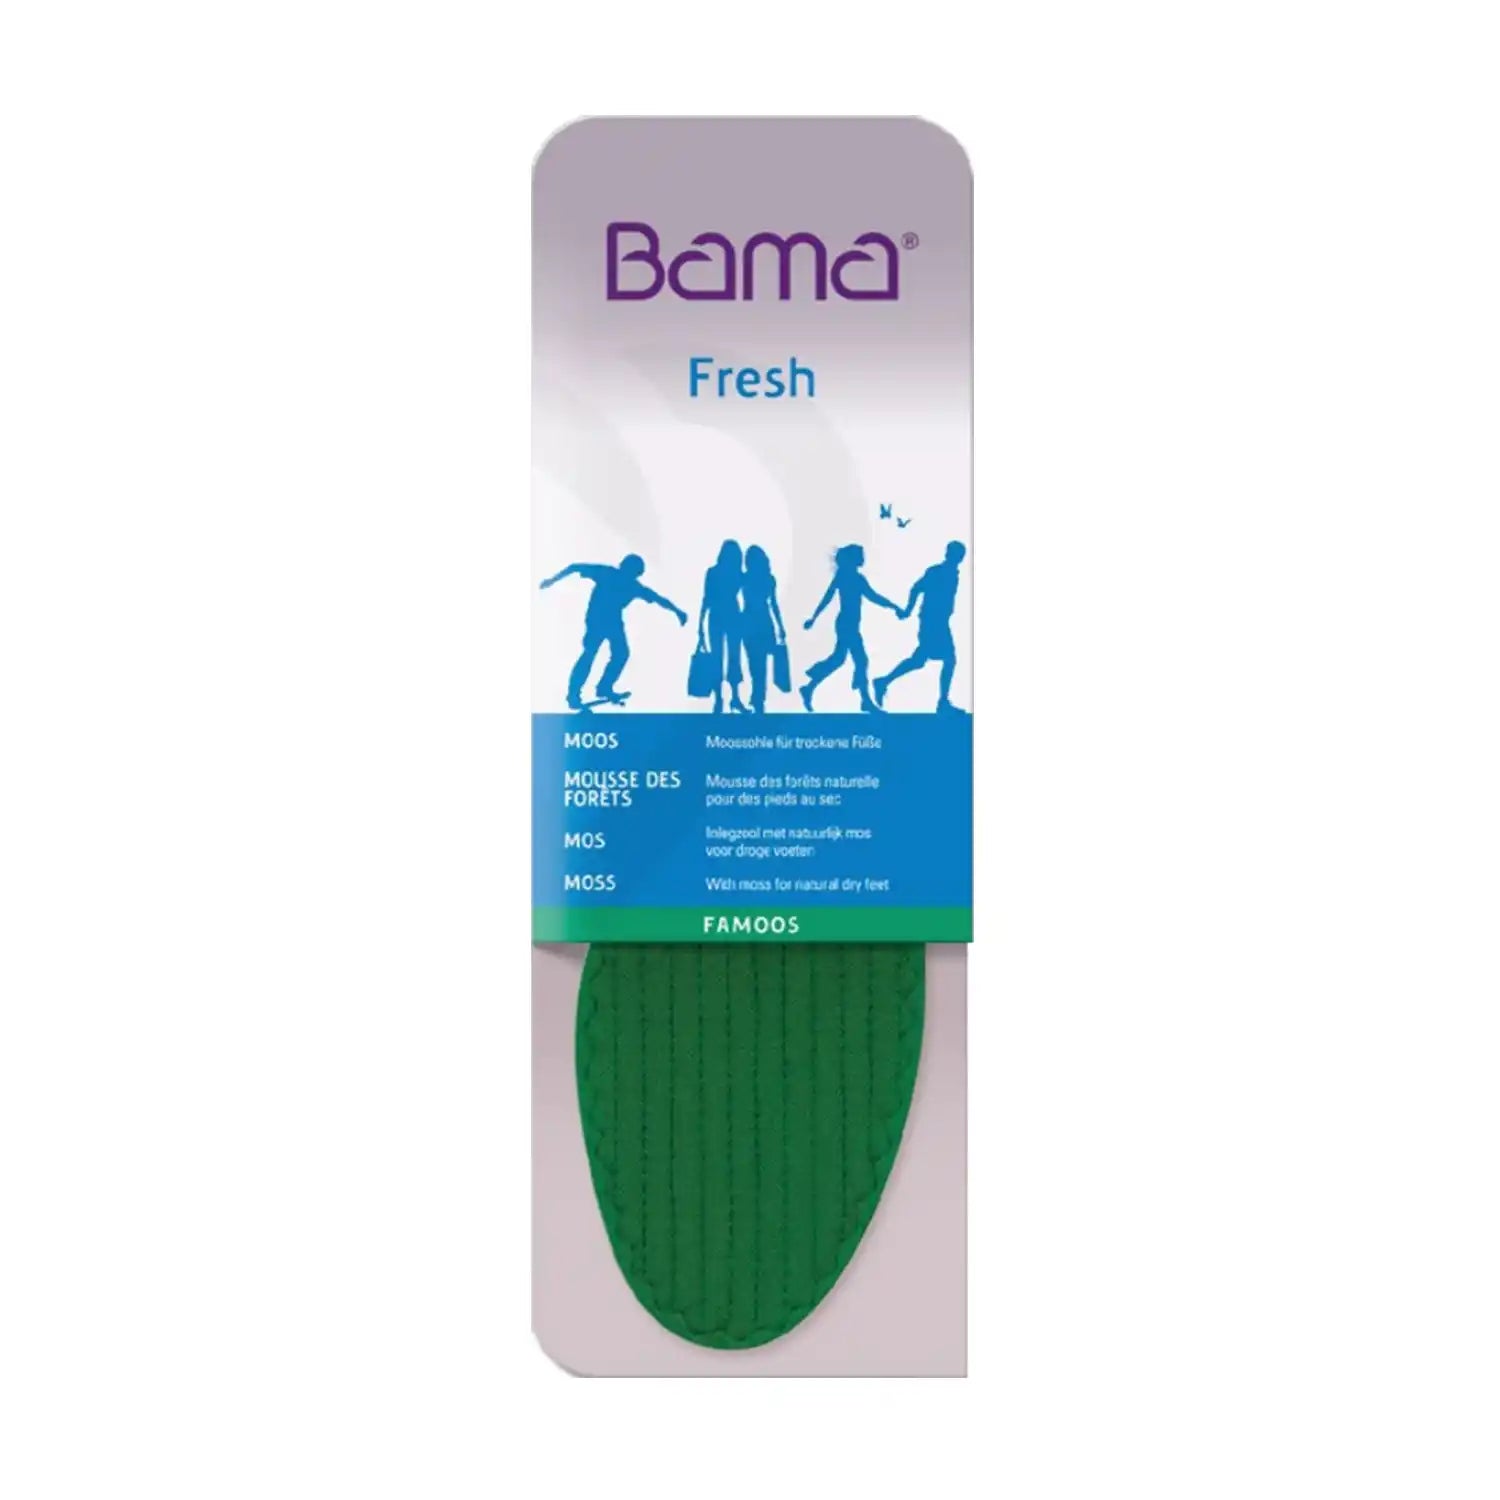 Bama Famoos Insoles 1 Shaws Department Stores